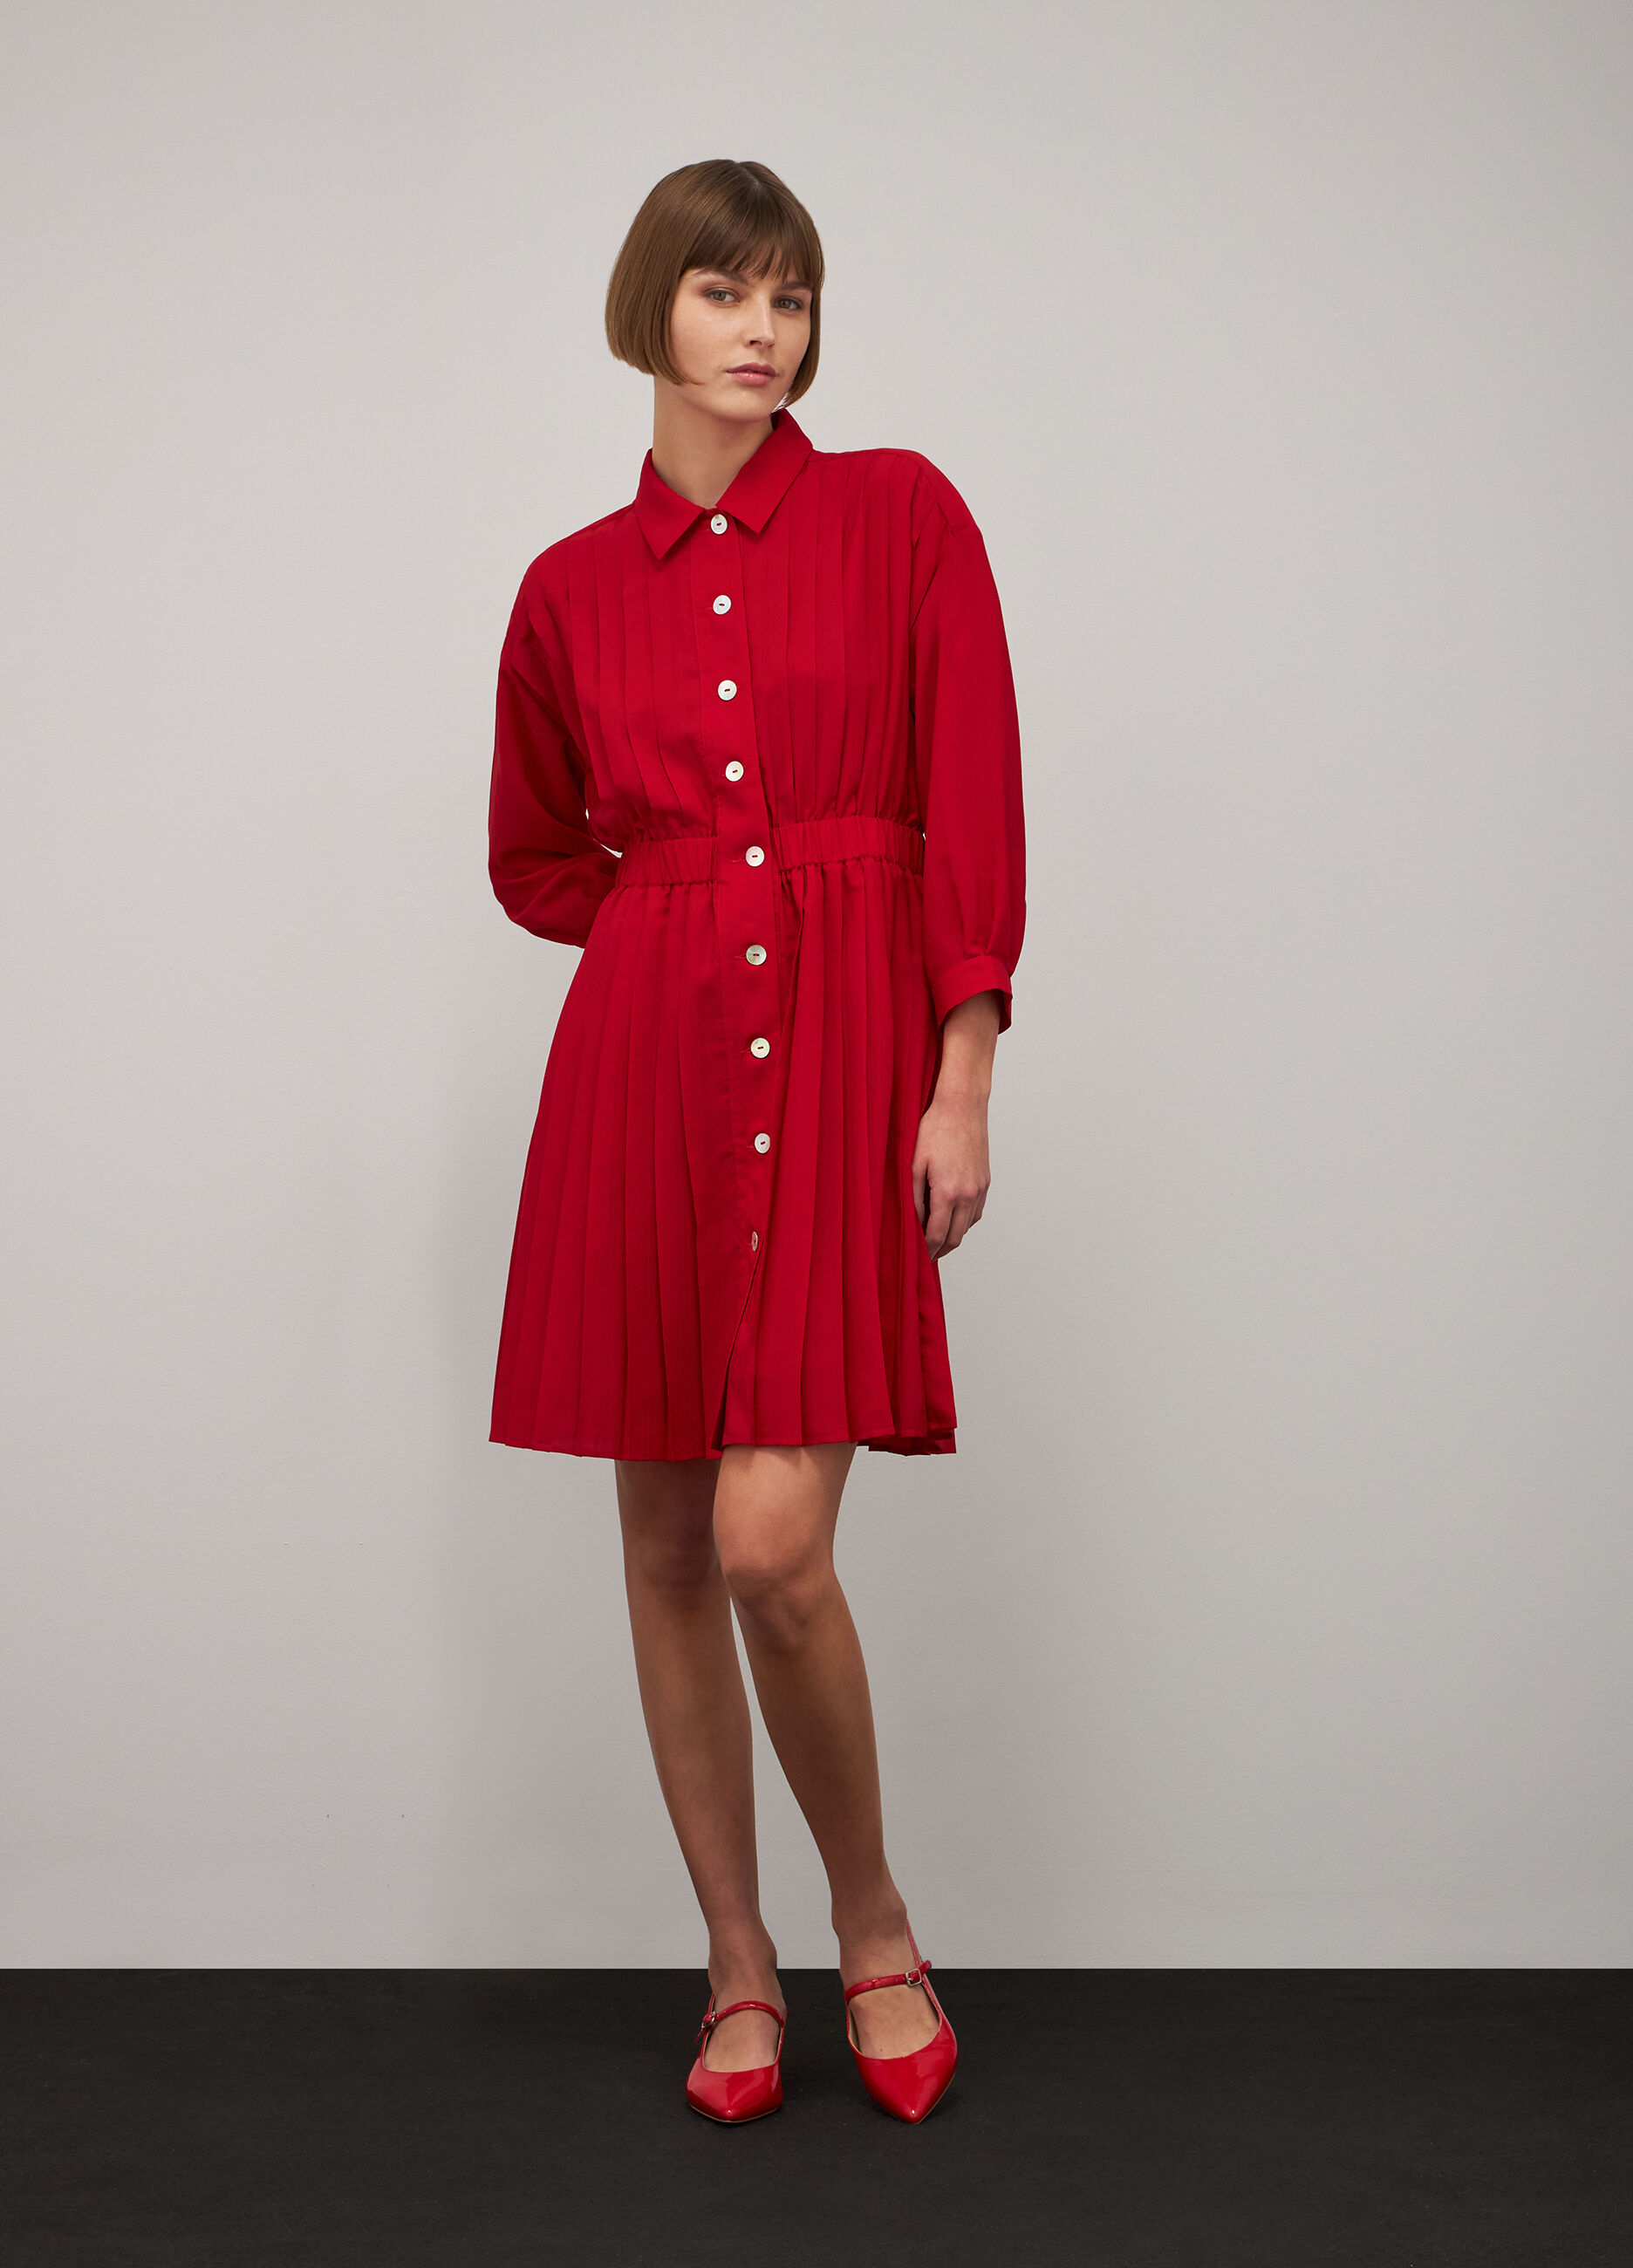 Red pleated dress